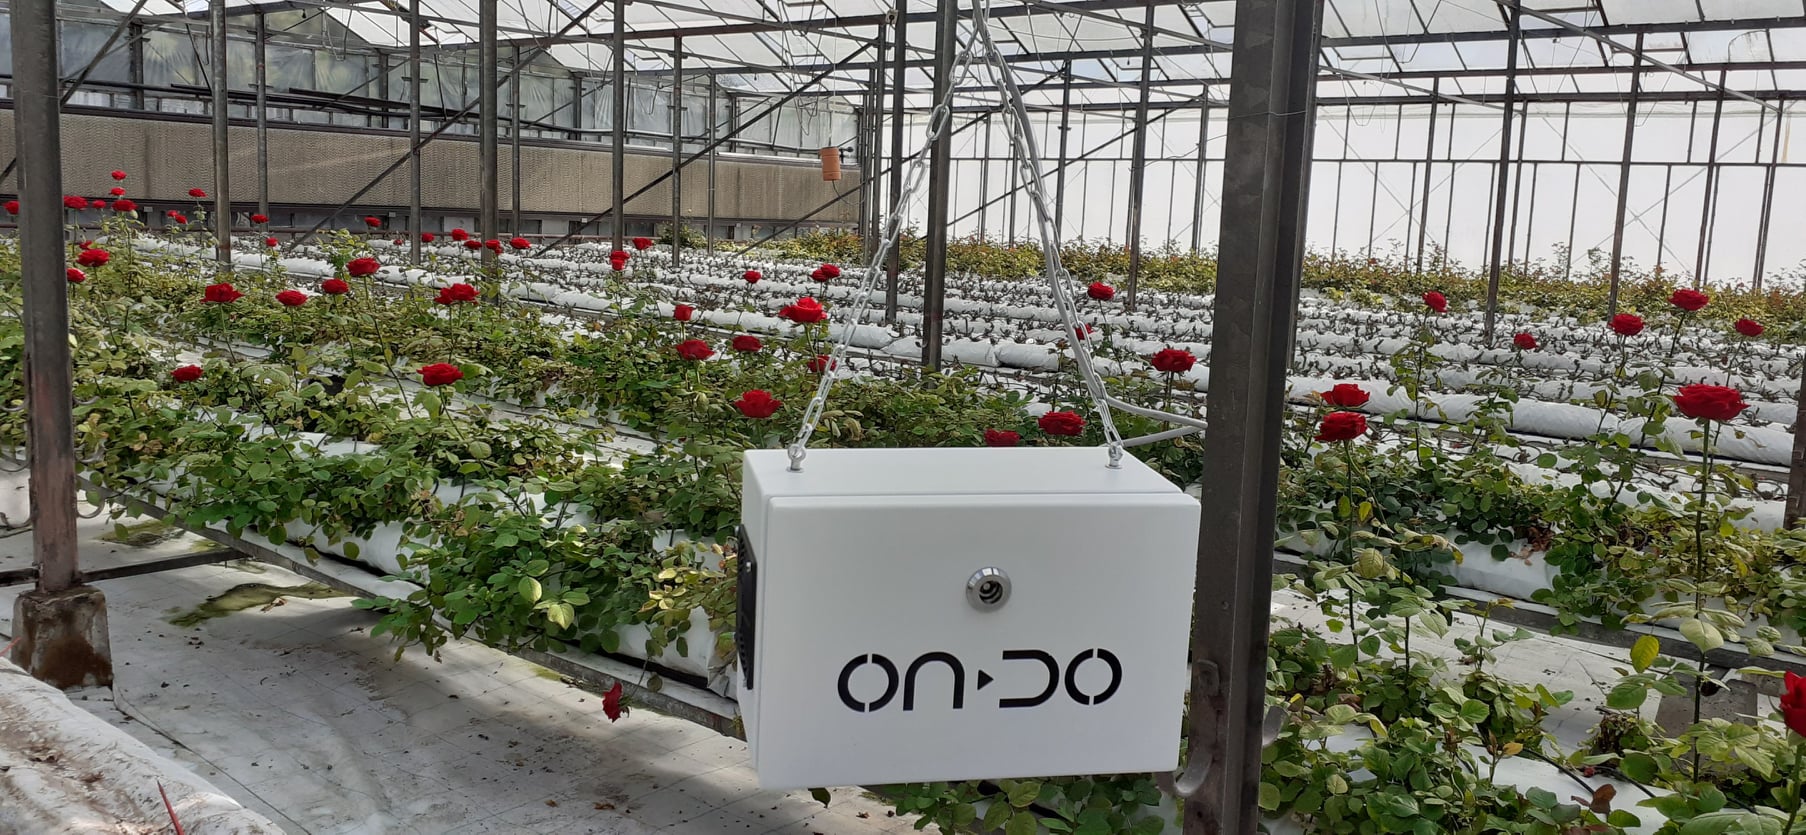 ONDO Smart Farming Solutions shares first customer results in a case study for Roseland customer